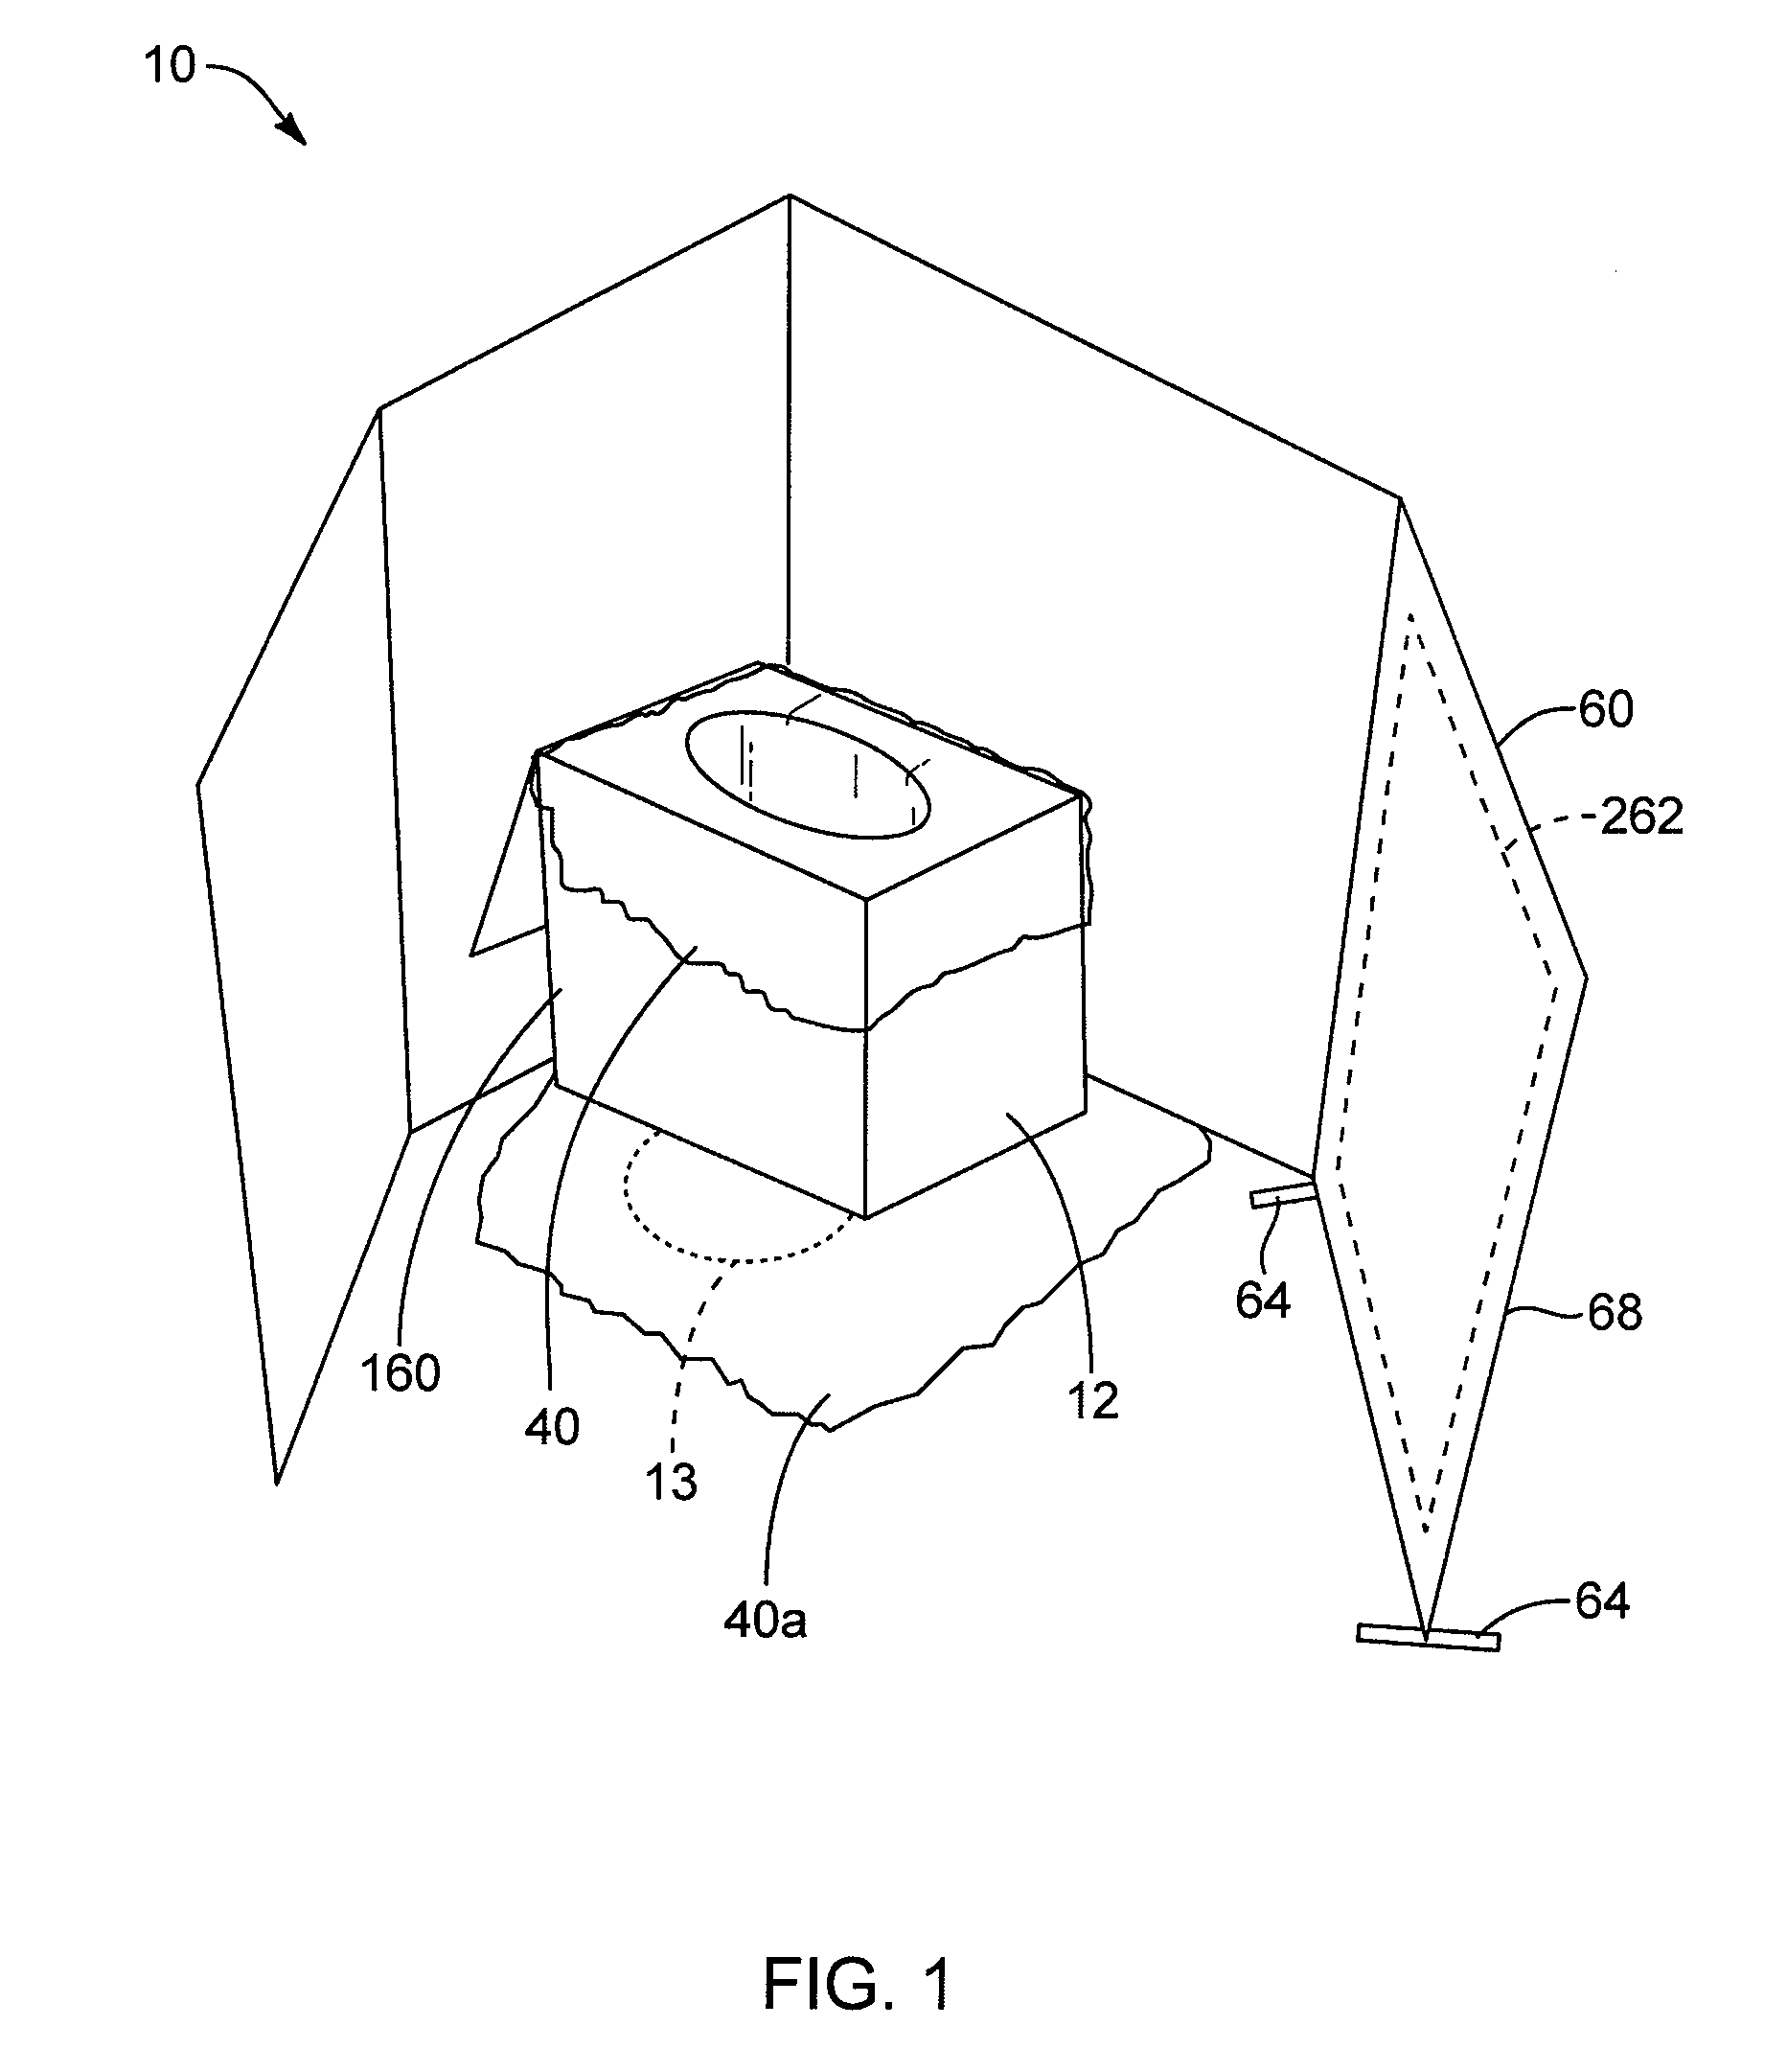 Systems and methods for providing a portable toilet system